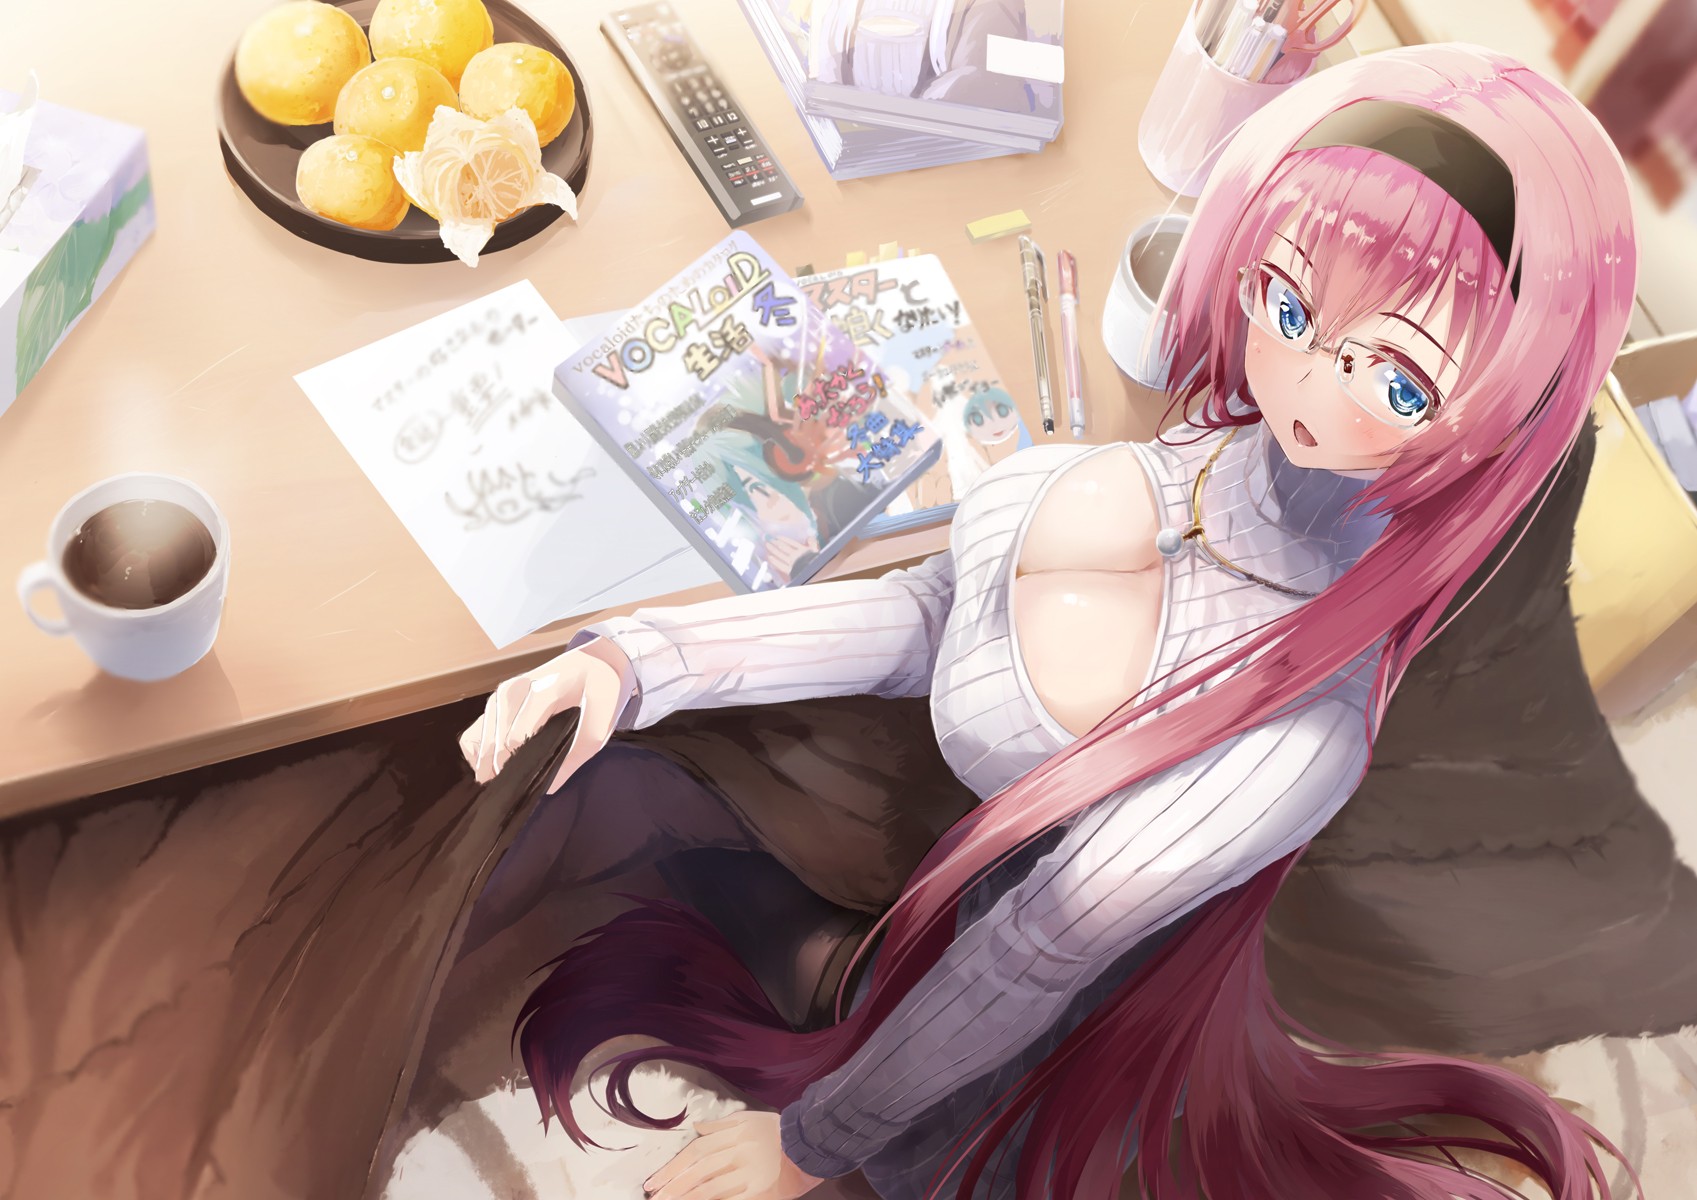 Anime 1697x1200 anime anime girls Vocaloid Megurine Luka long hair pink hair cleavage Pixiv food fruit cup coffee boobs big boobs women with glasses sitting desk TV Remote blue eyes cleavage cutout open shirt sweater keyhole turtleneck drink bright